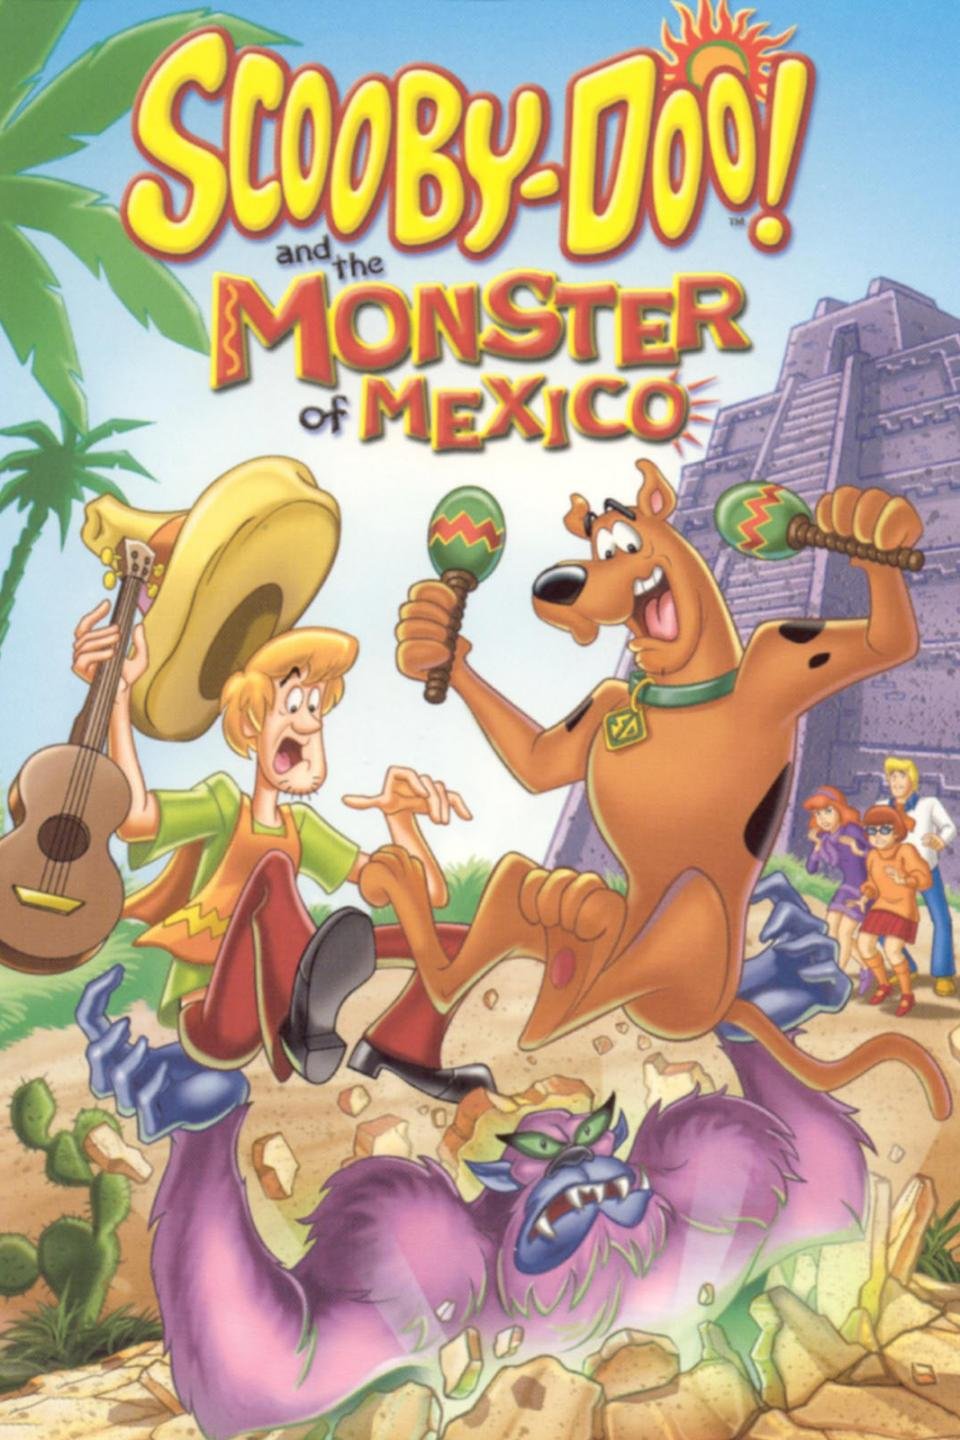 Poster of the movie Scooby-Doo and the Monster of Mexico